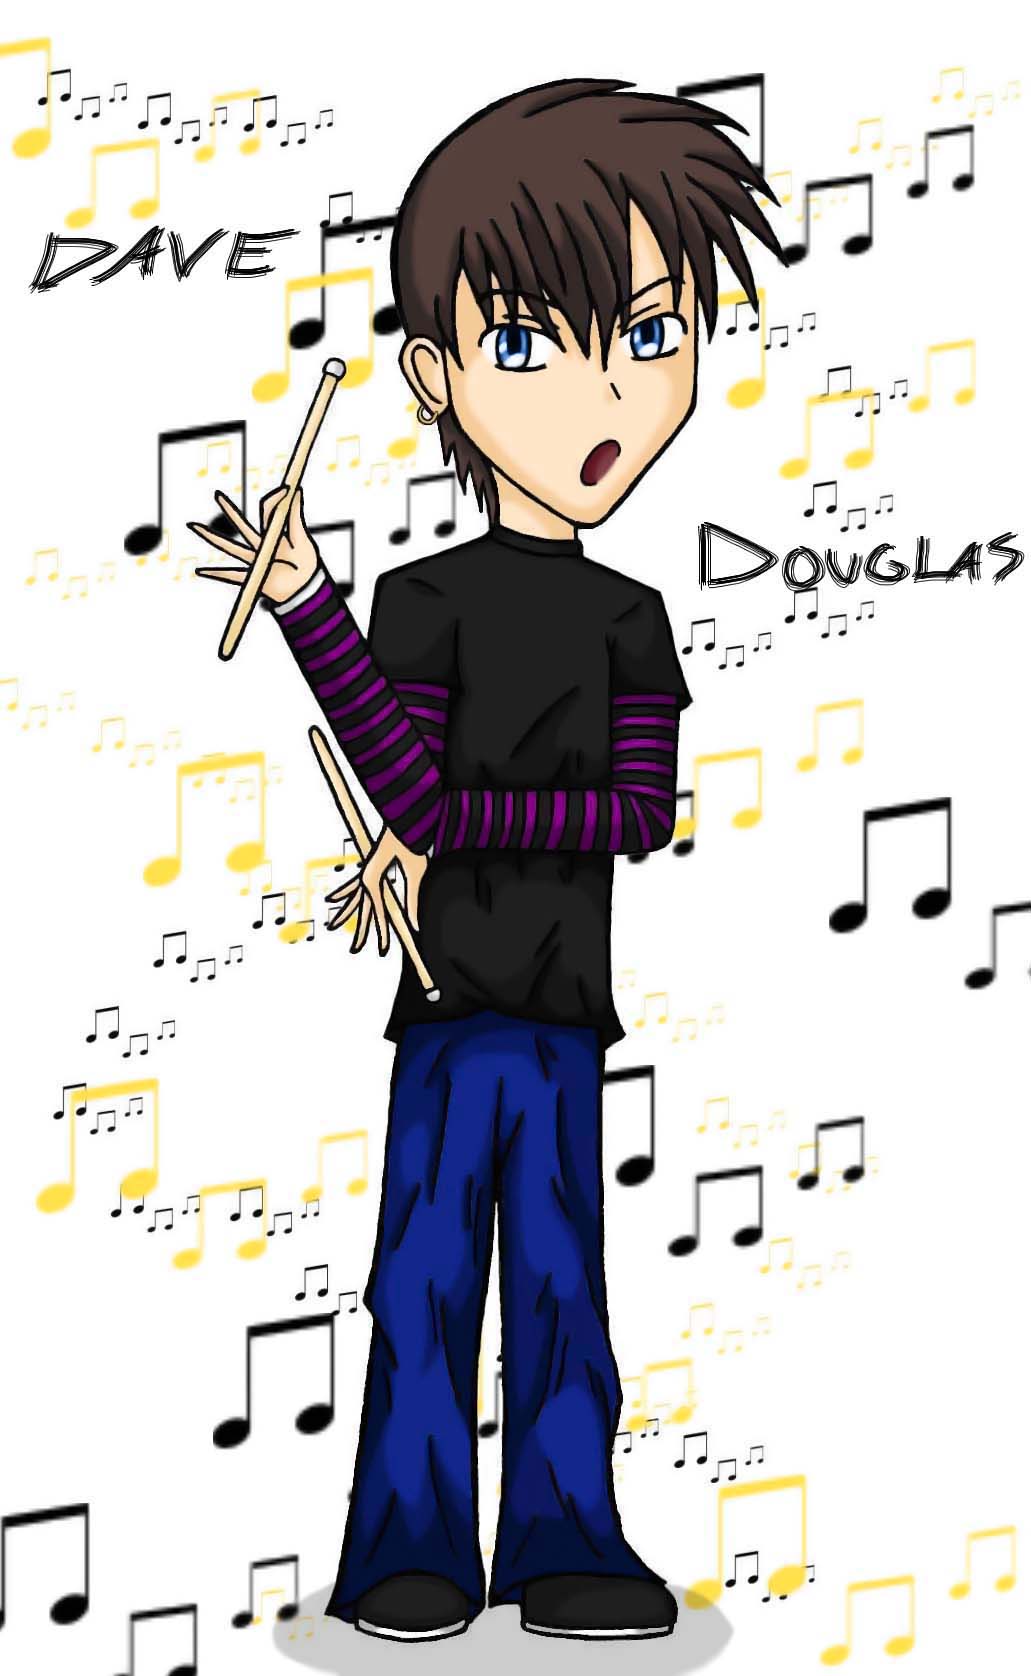 Dave Douglas Anime by TheCoffeeFairy